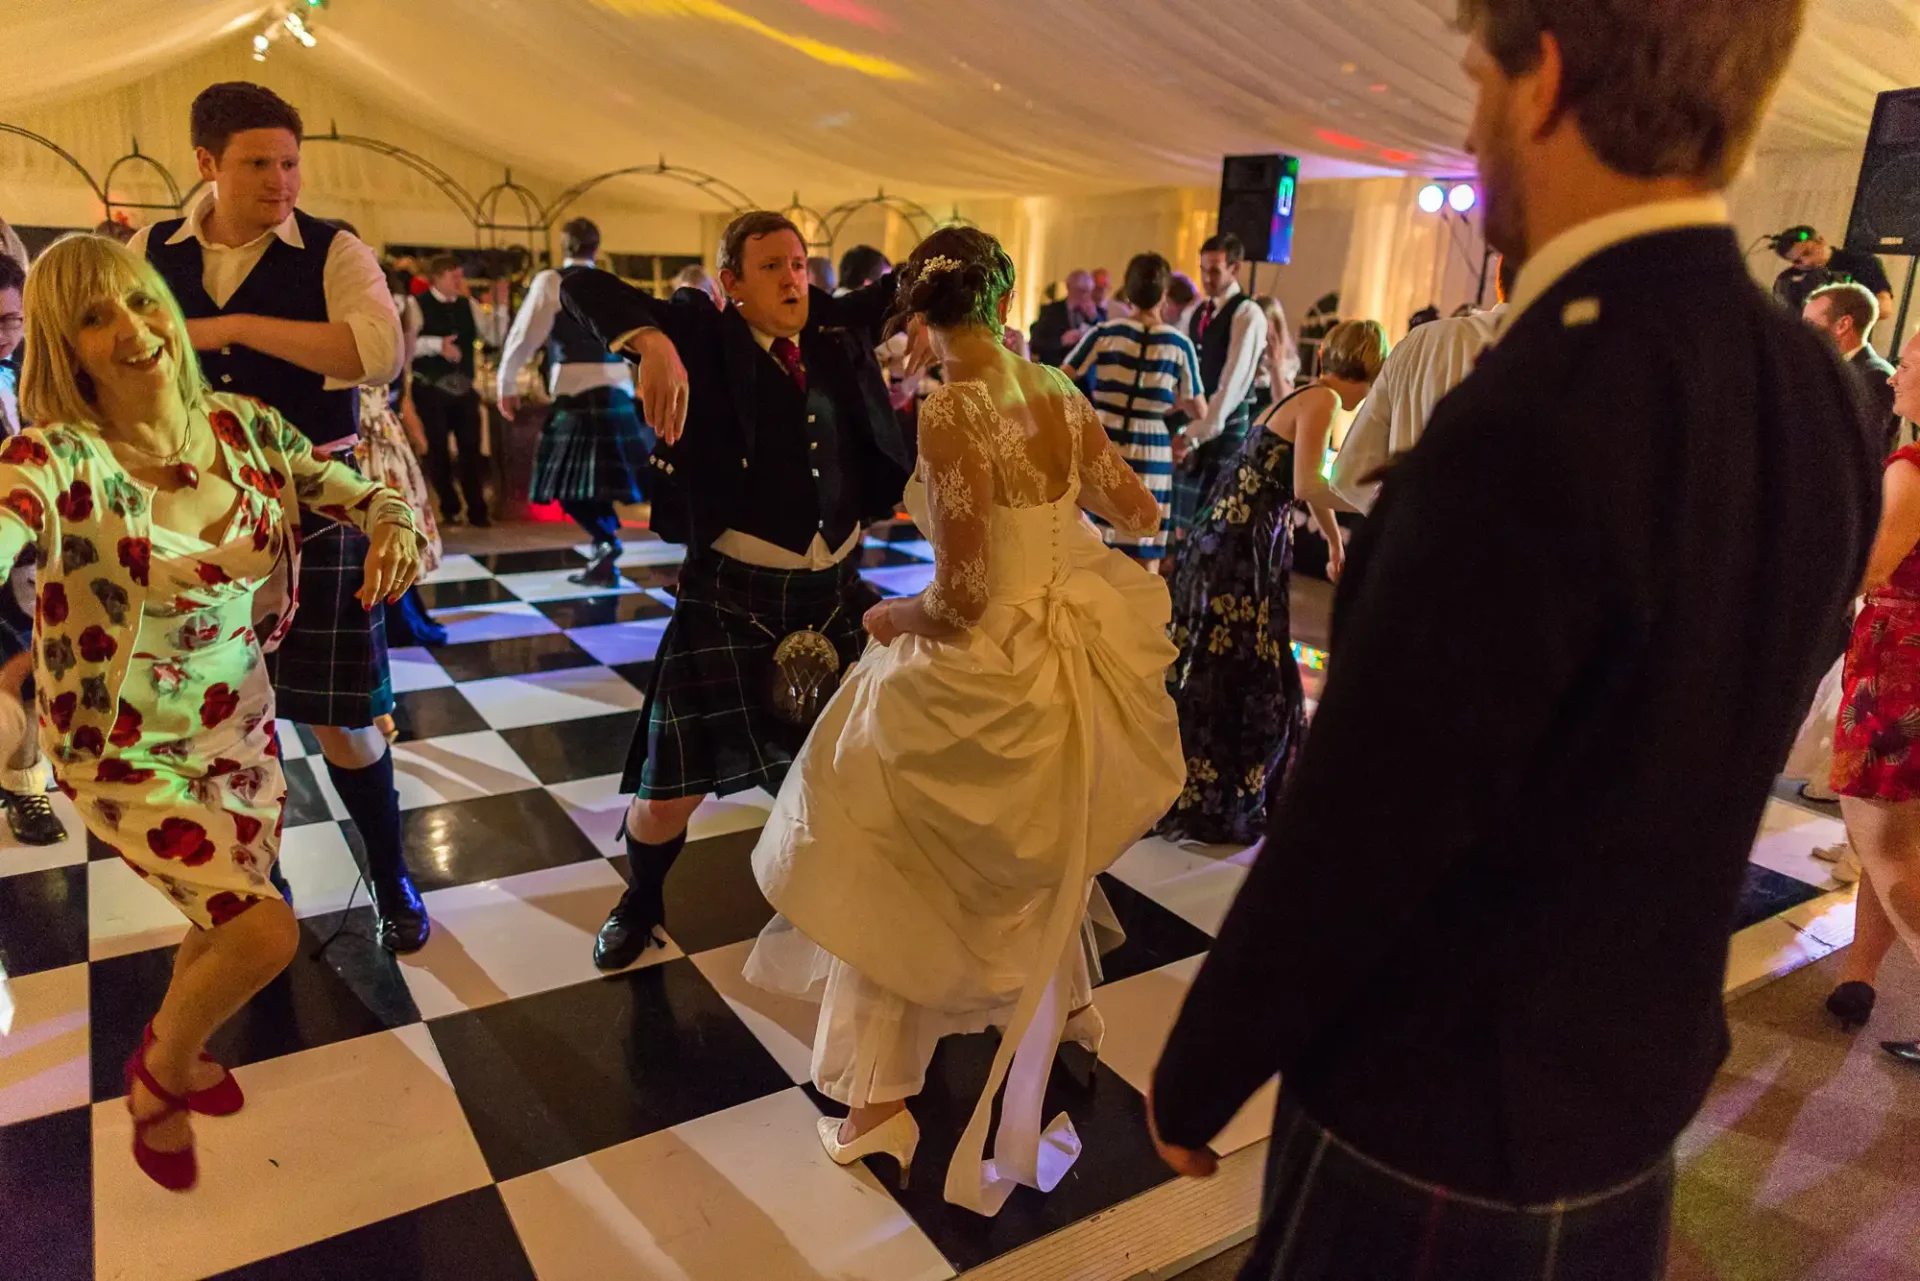 Guests enthusiastically dancing at a wedding reception inside a tent with a checkered floor; a bride in a white dress is in the foreground.